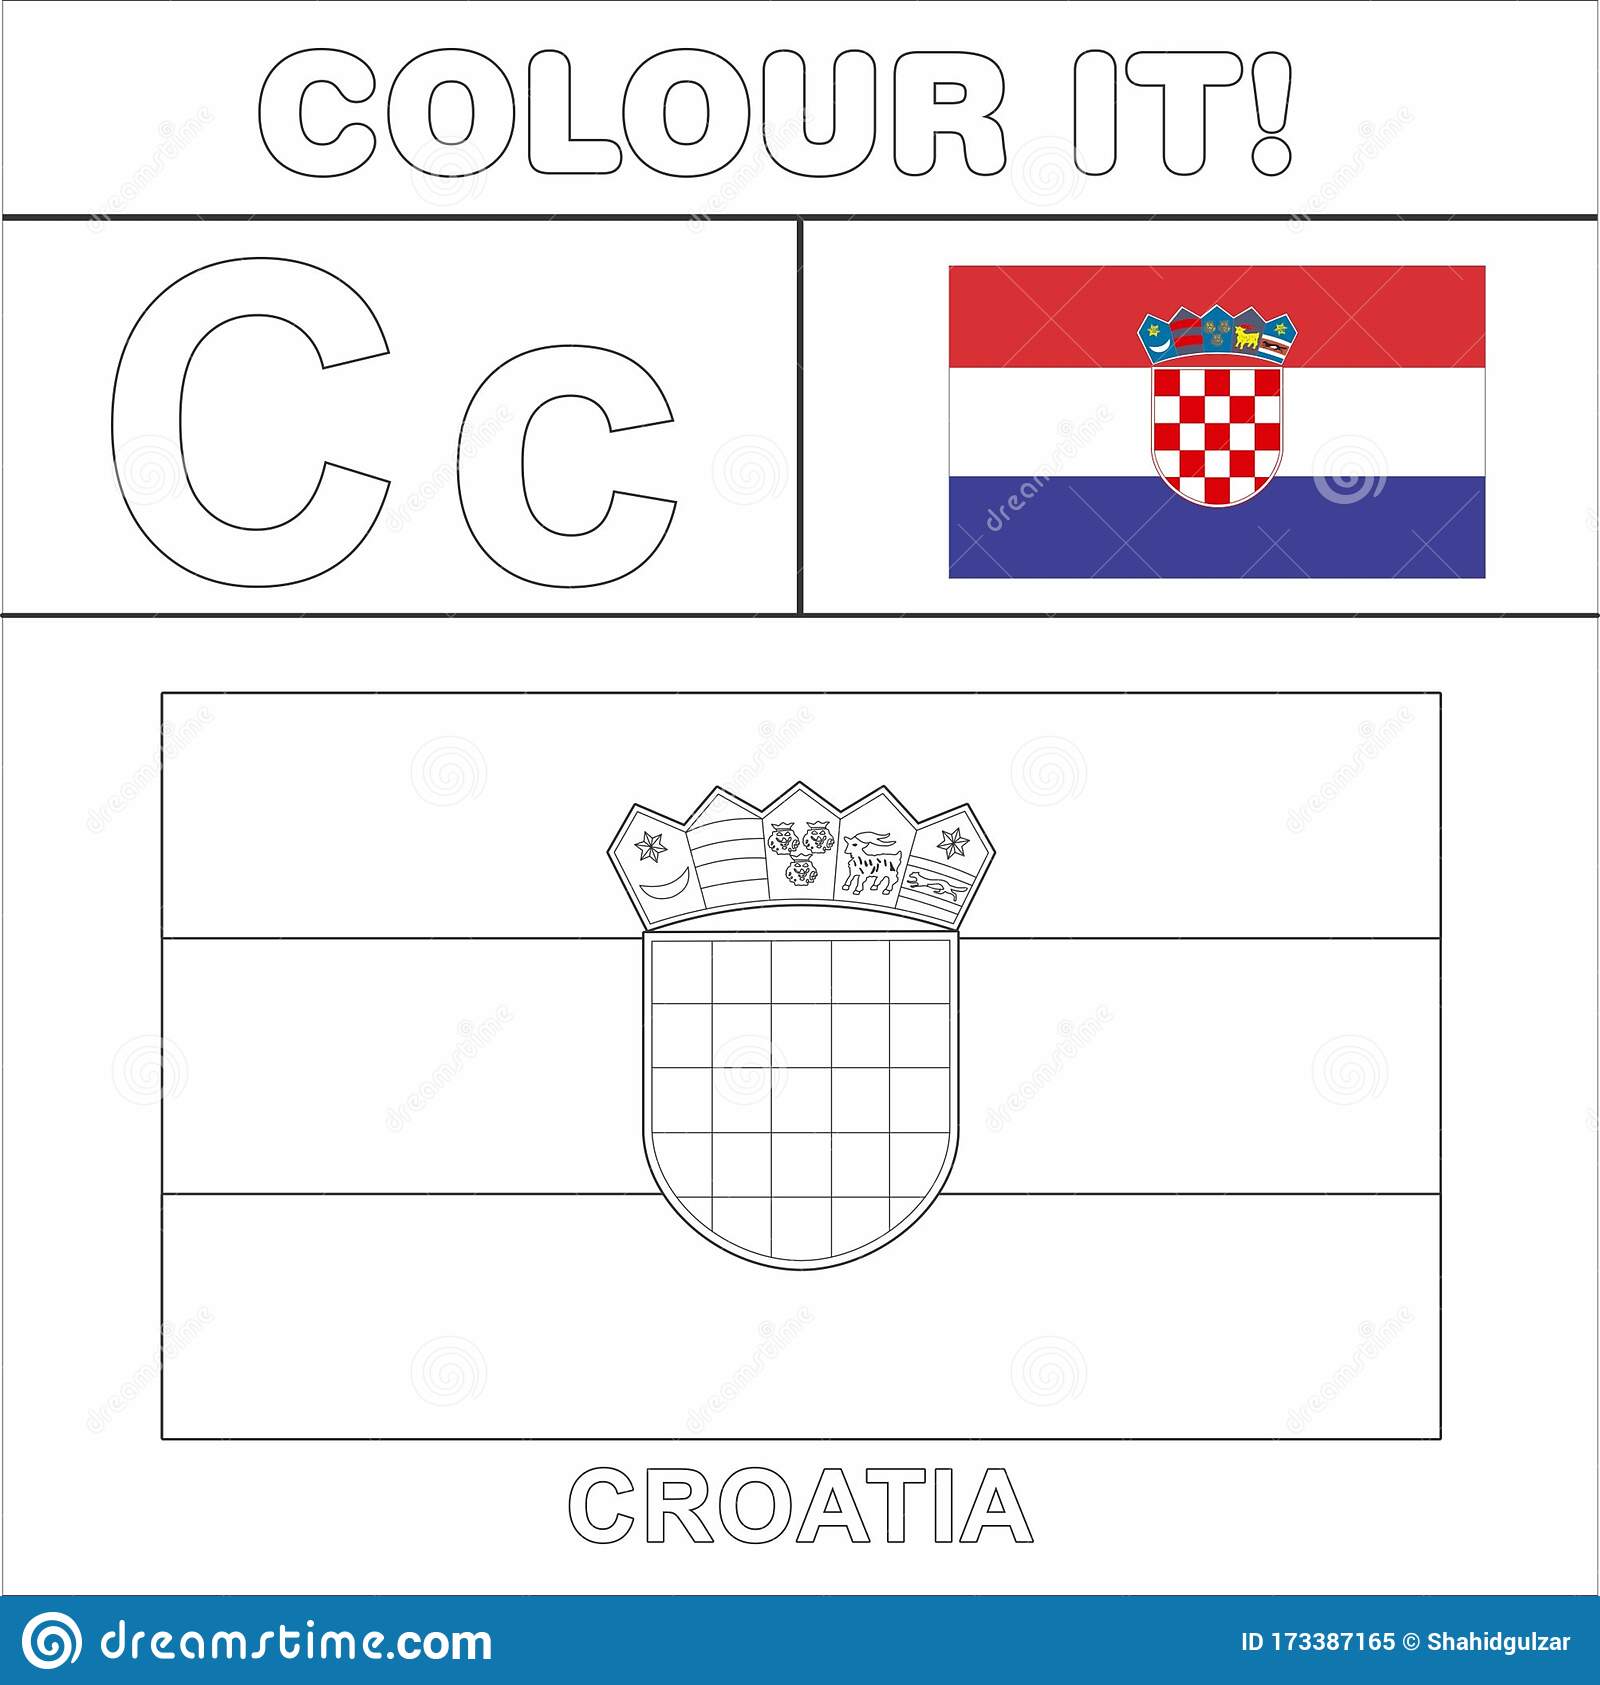 Croatian living flag coloring page